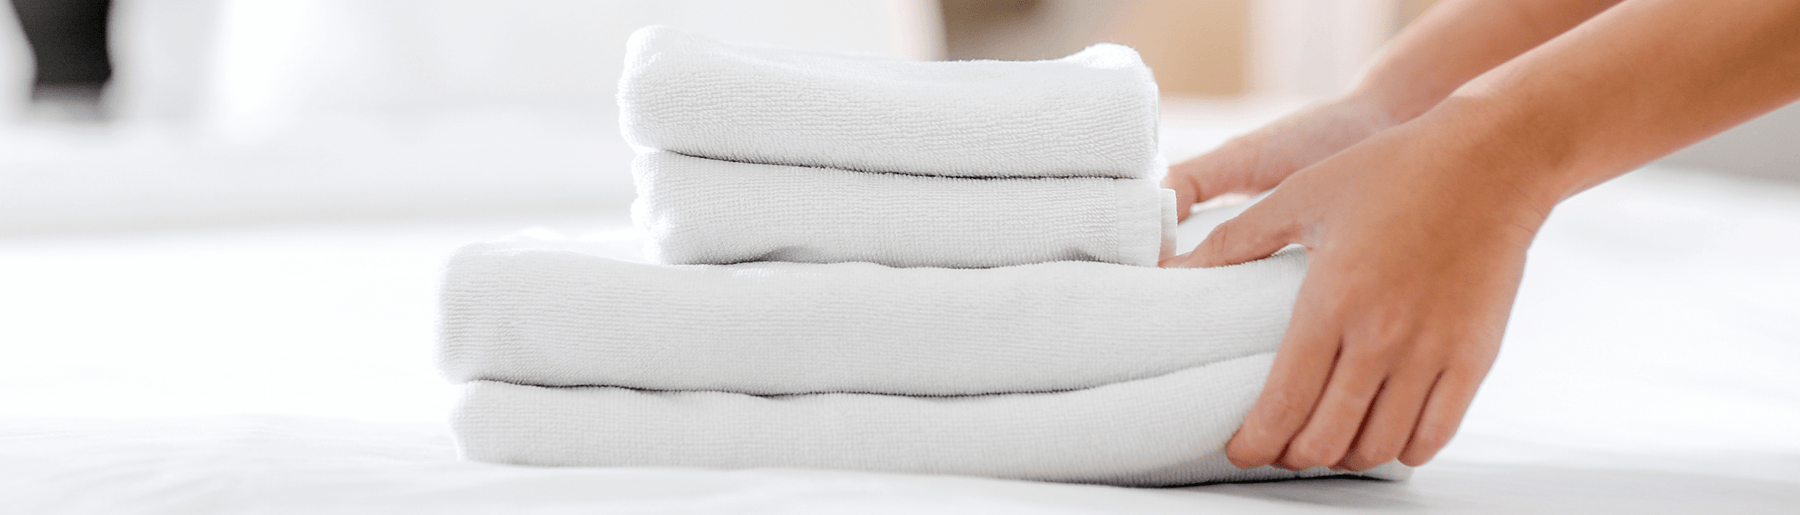 Learn five tips to buying towels like a pro